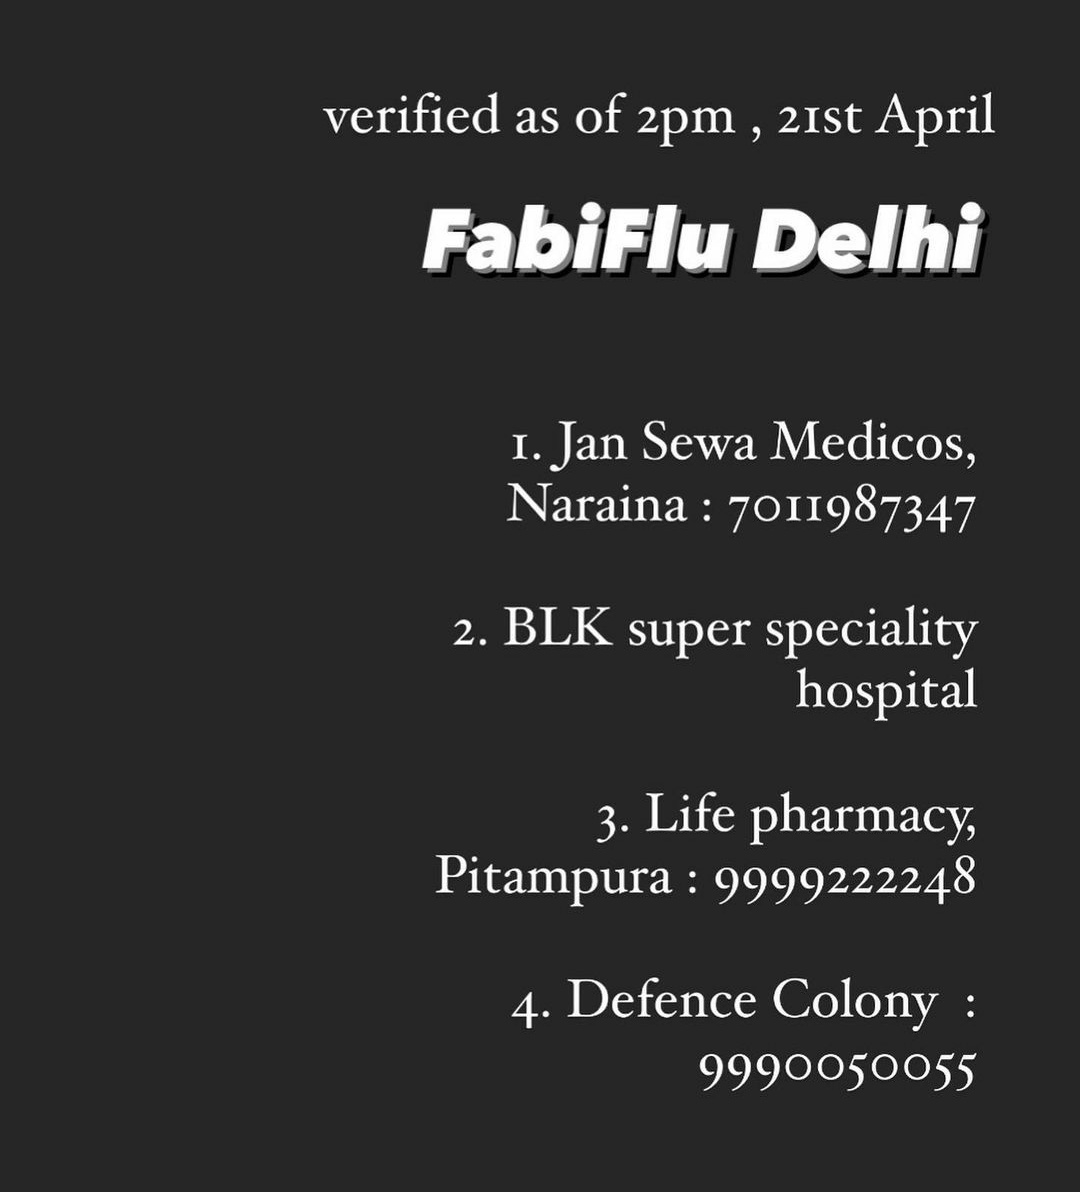 The followed are for Delhi regarding different services from Ambulance to Remedesvir to Tocilizumab to Oxygen Cylinders to Testing.